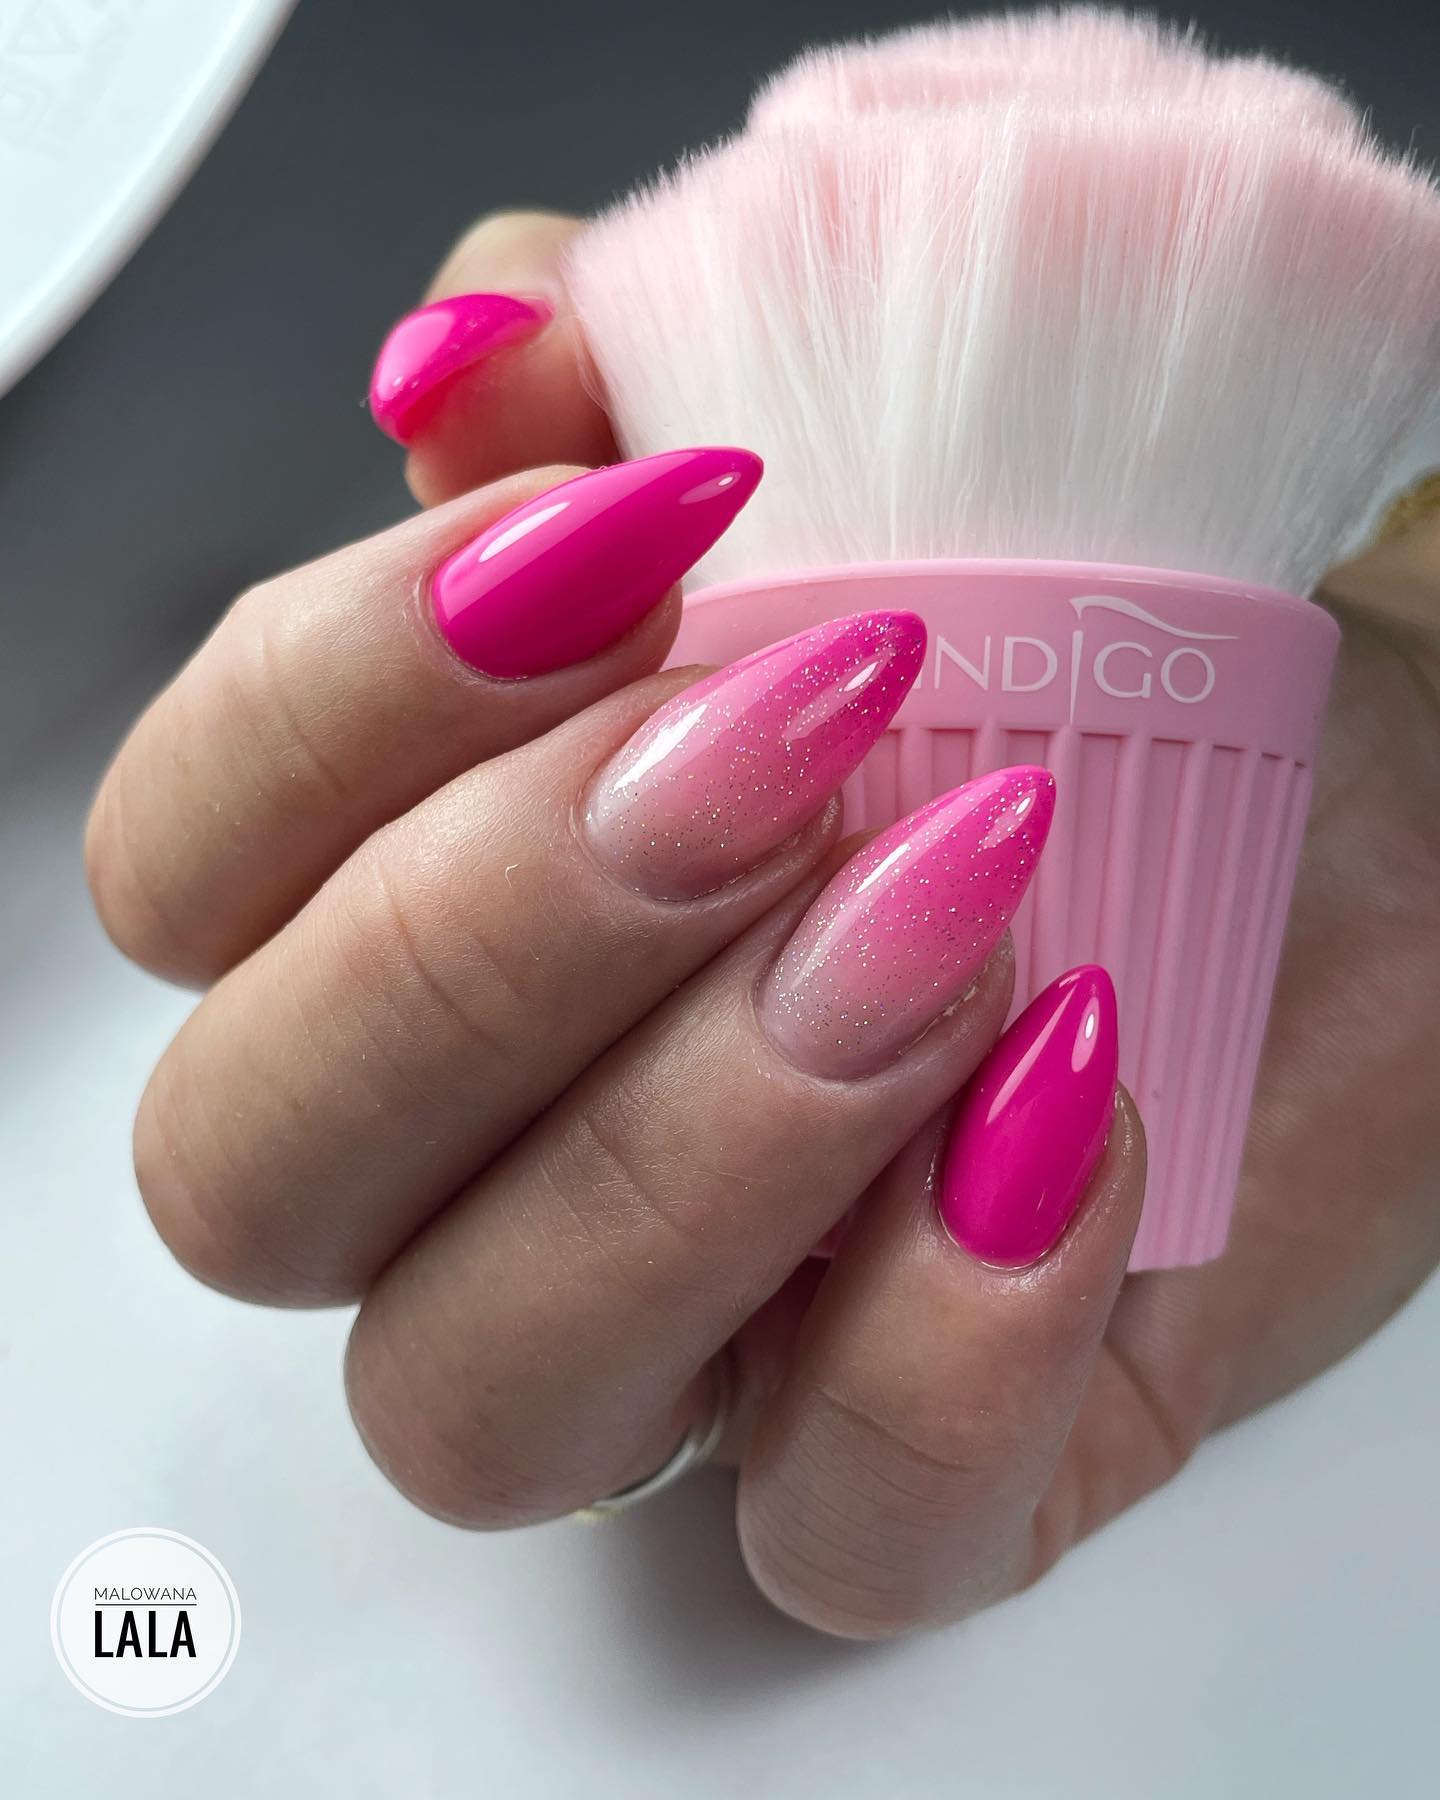 If pink is your favorite color why not show off this marvelous design? It is easy to achieve with the right shade of pink and nude.